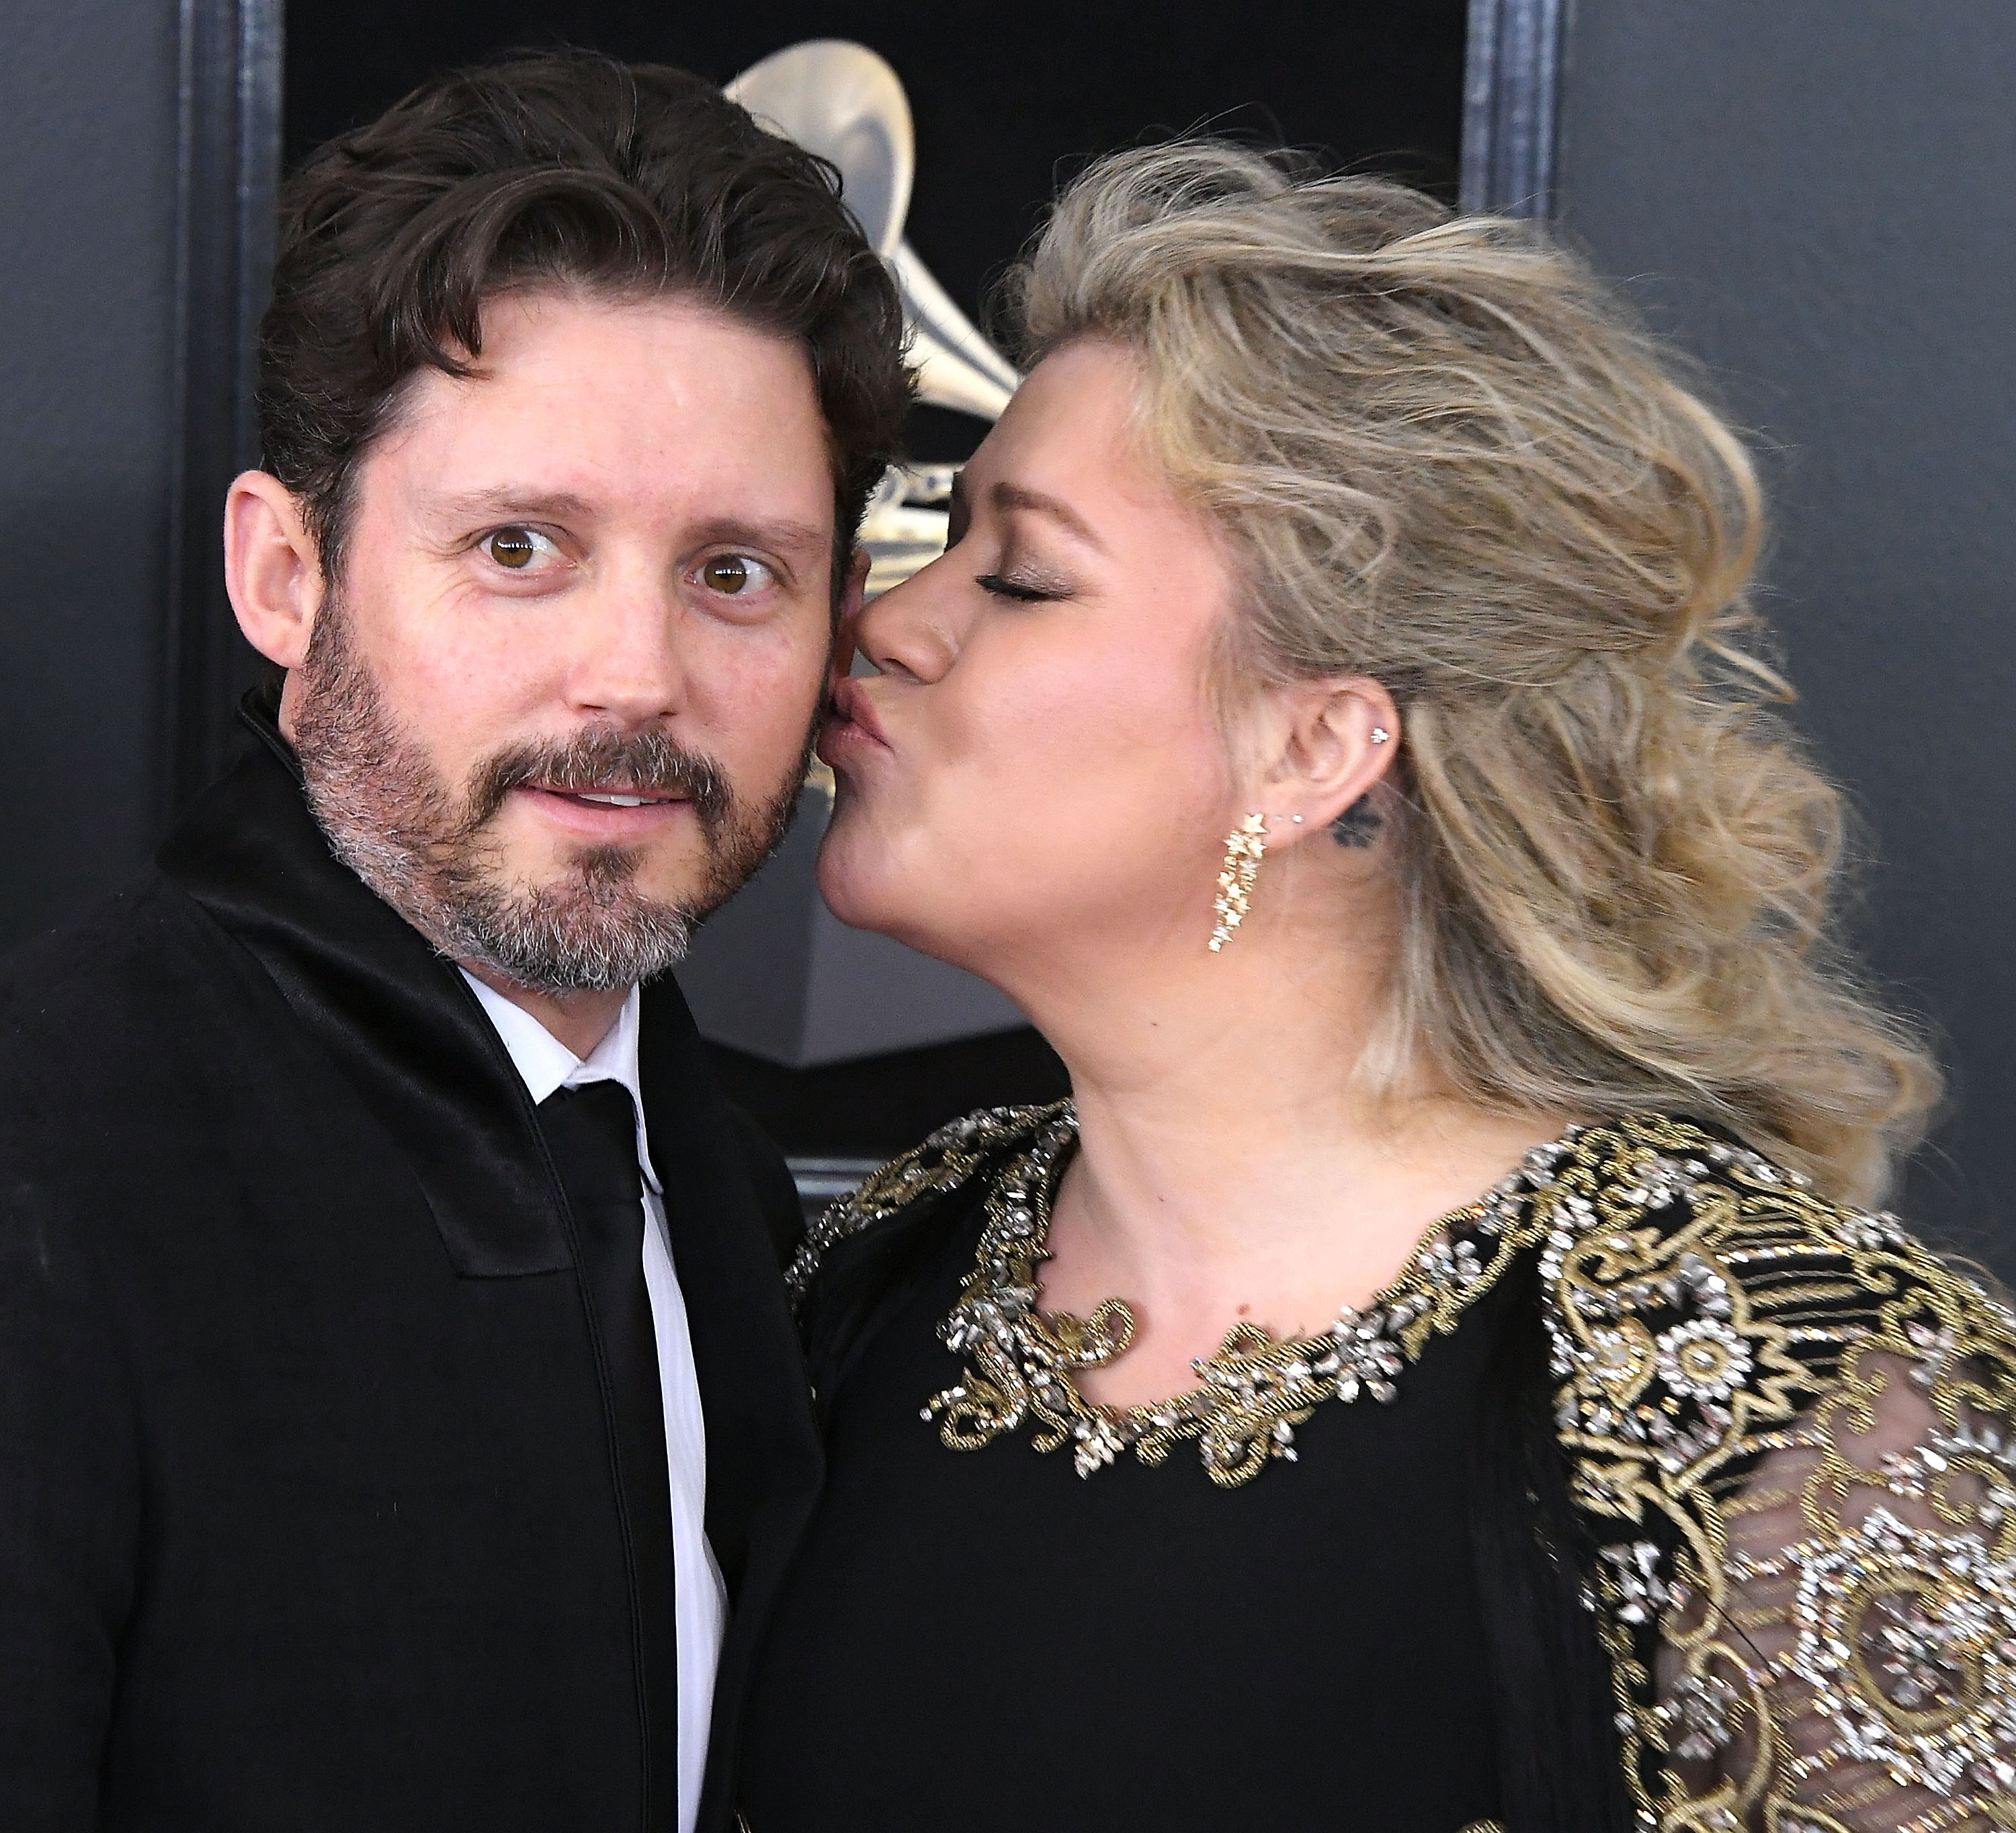 Brandon Blackstock and Kelly Clarkson at the 60th Annual Grammy Awards in New York City, 2018 | Source: Getty Images